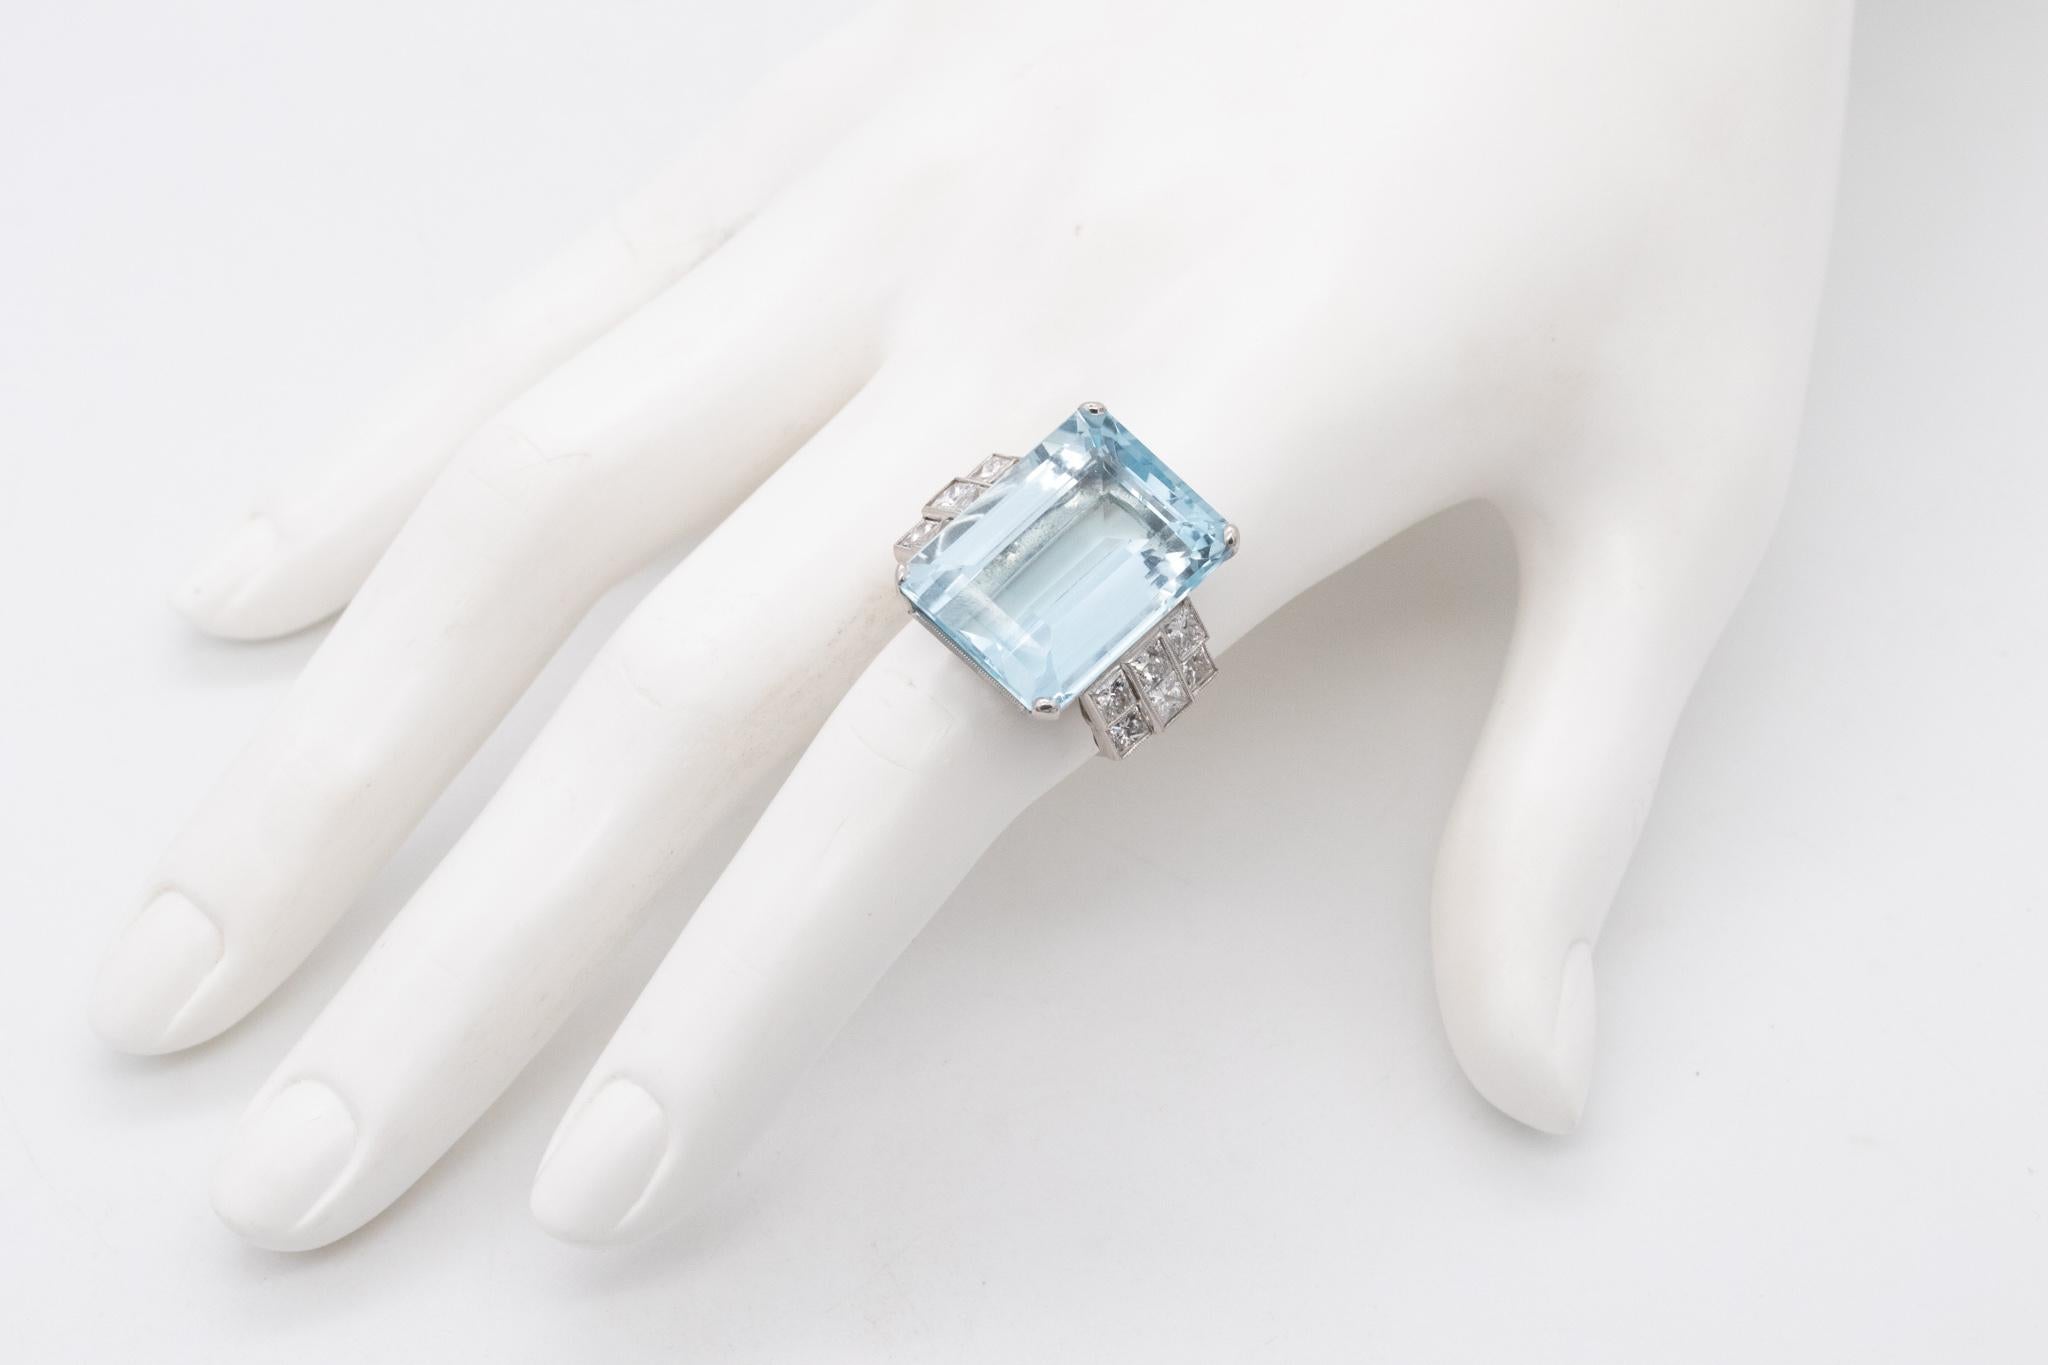 Statement cocktail ring with a large Aquamarine.

An impeccable piece from the American art deco period, circa 1940. Is was crafted in solid .900/.999 platinum and mounted in the center with an emerald step cut (22 x 16 x 10 mm) of a natural blue